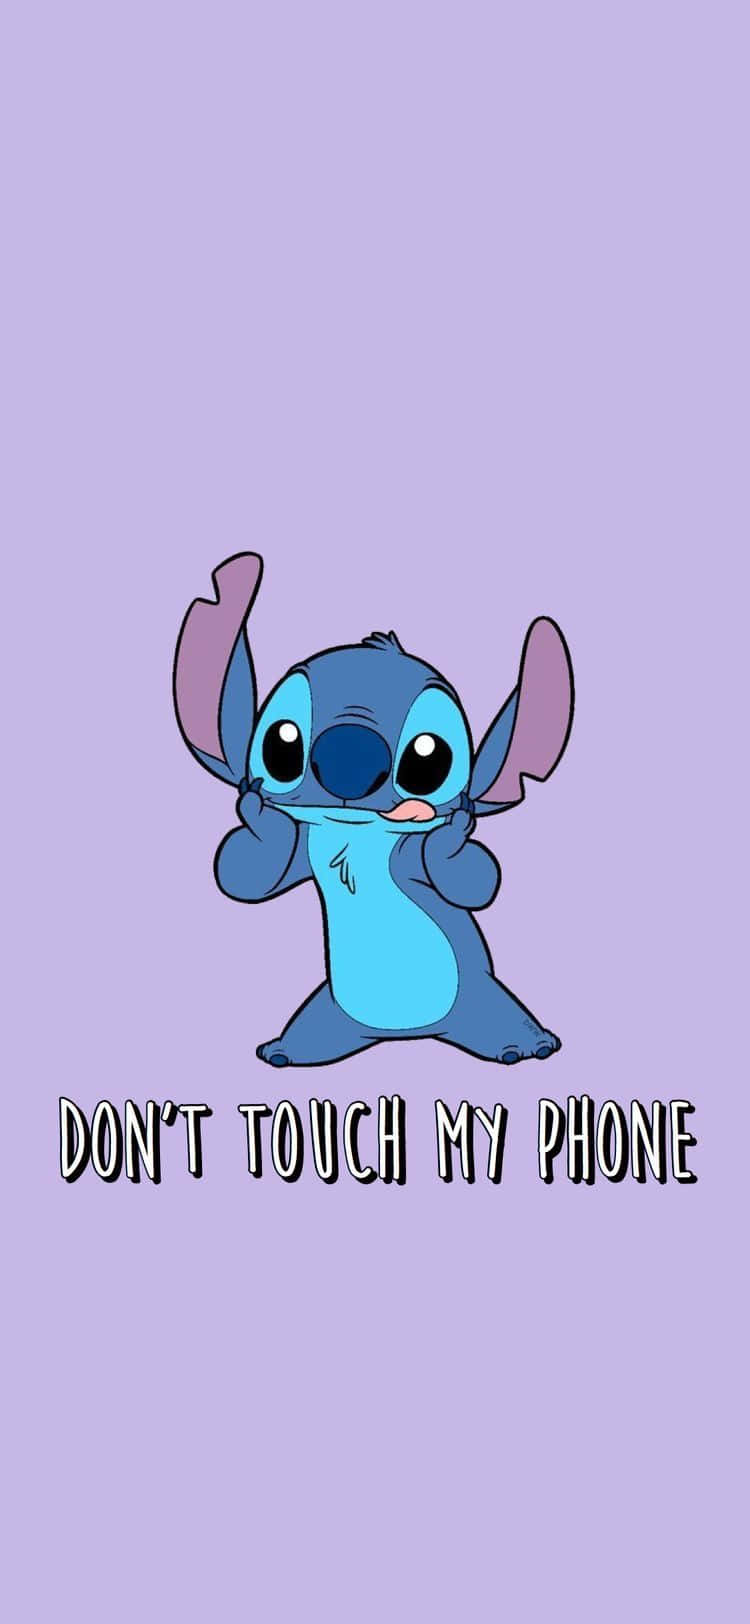 Have Fun with Stitch This Summer!